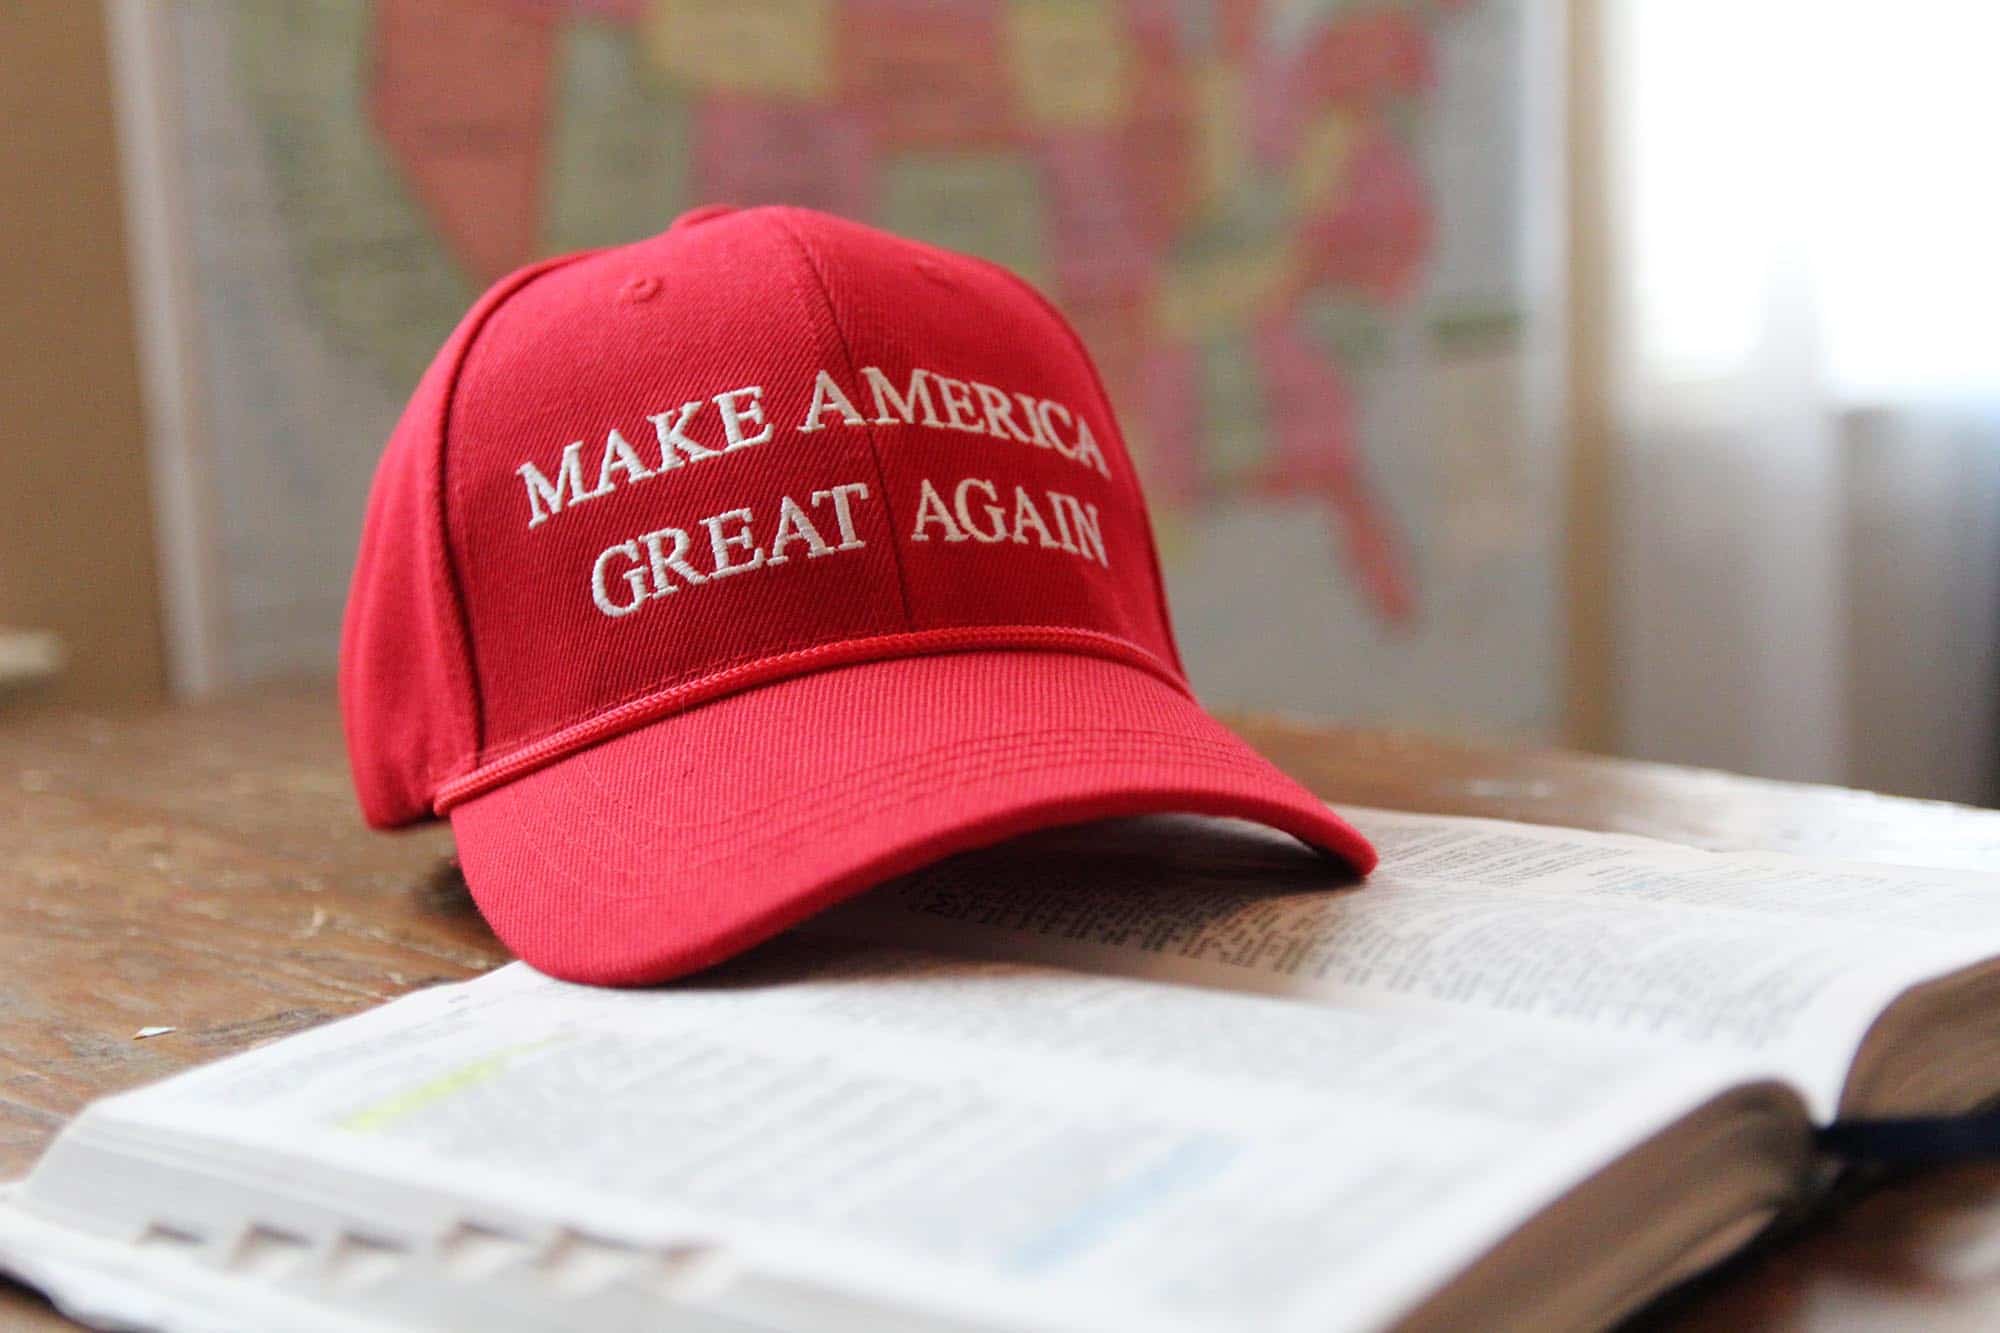 A red baseball cap with "Make America Great Again" sits on an open-faced Bible.